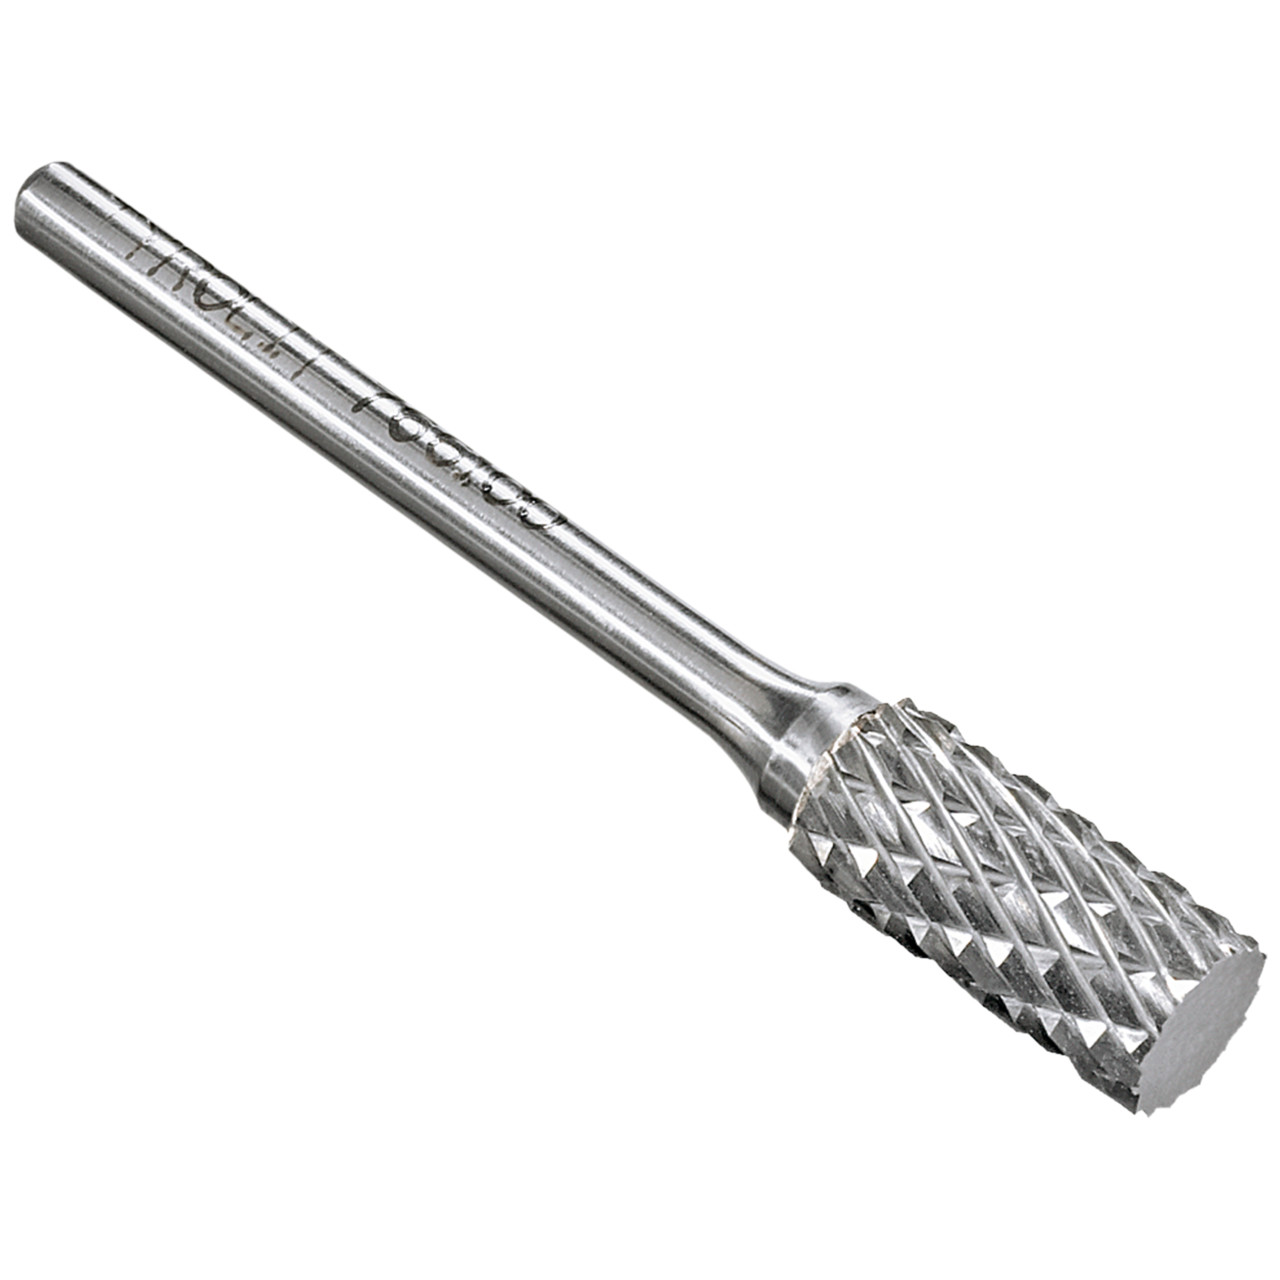 Tyrolit Carbide end mill DxT-SxL 8x19-6x65 For cast iron, steel and stainless steel, shape: 52ZYA - cylinder, Art. 768750